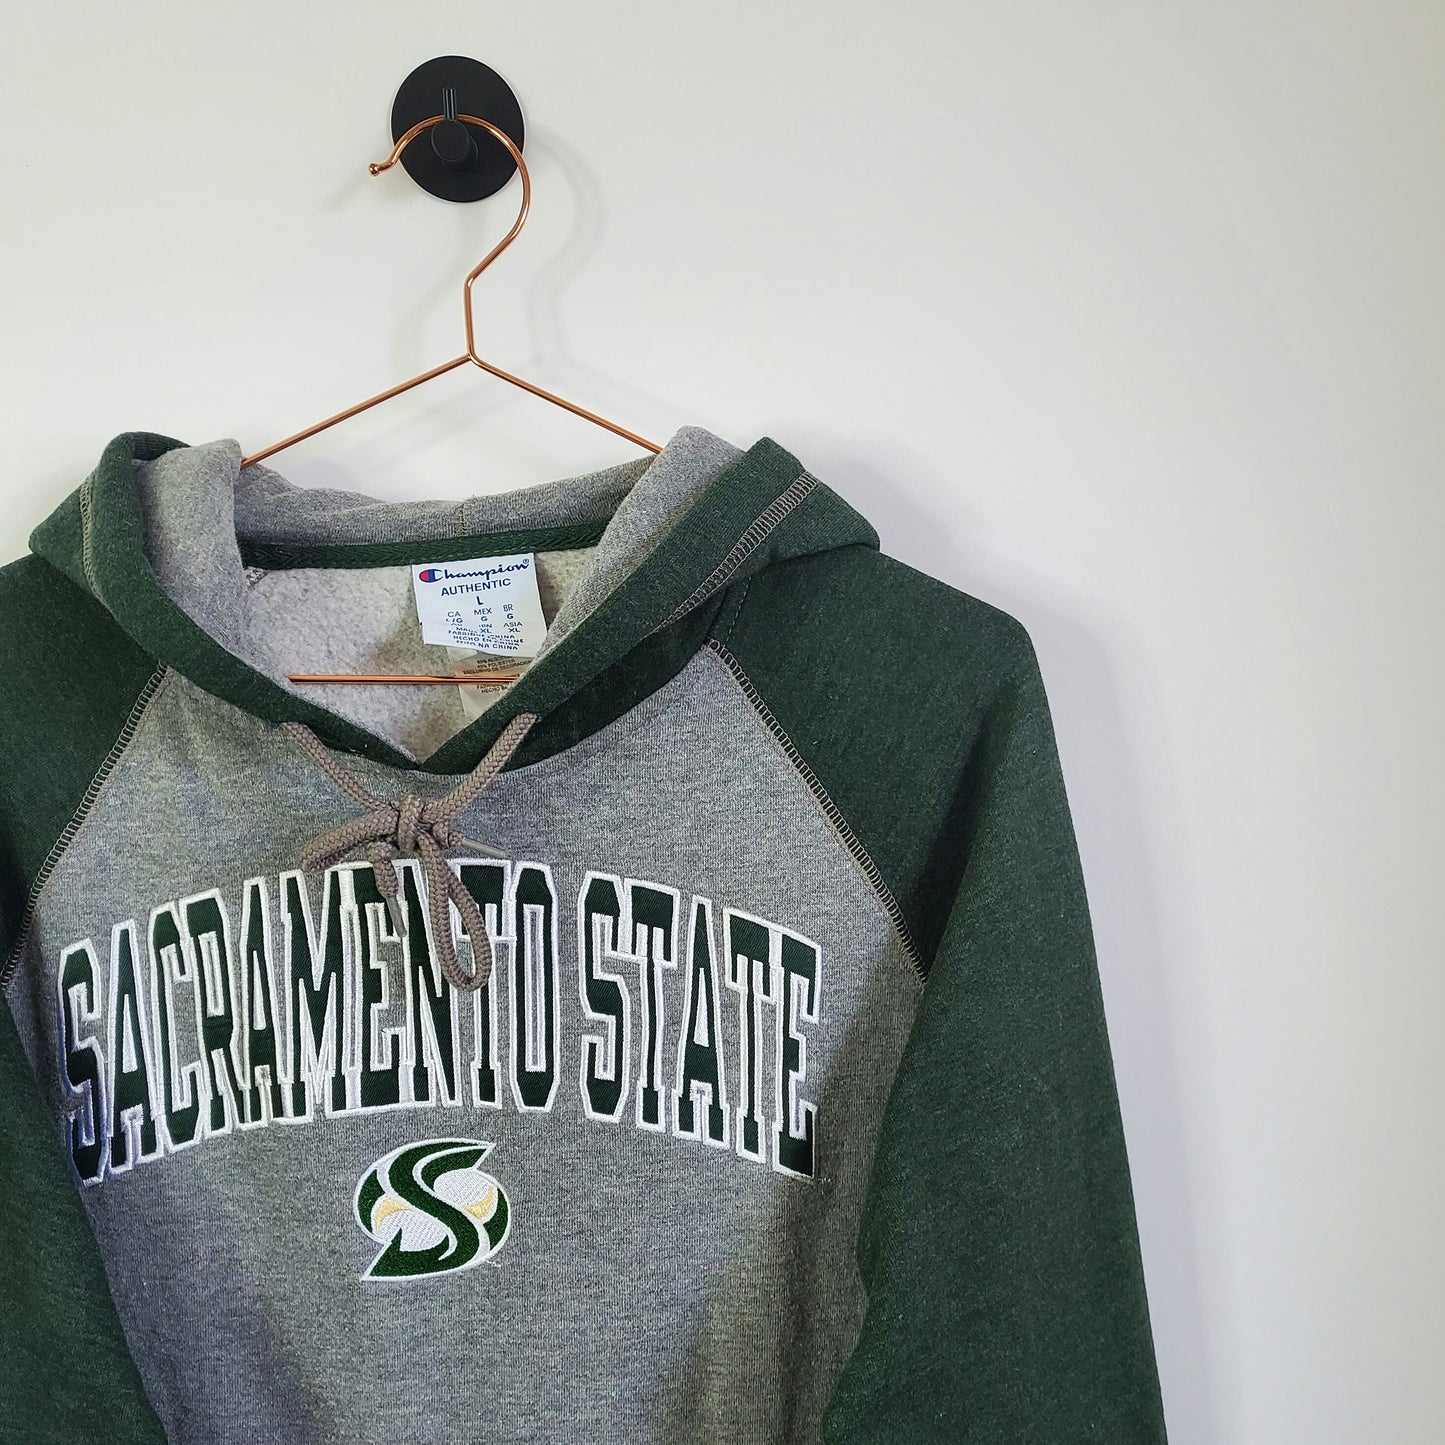 Vintage Recovery - Sacramento State Vintage Champion Hoodie Grey and Green Size L